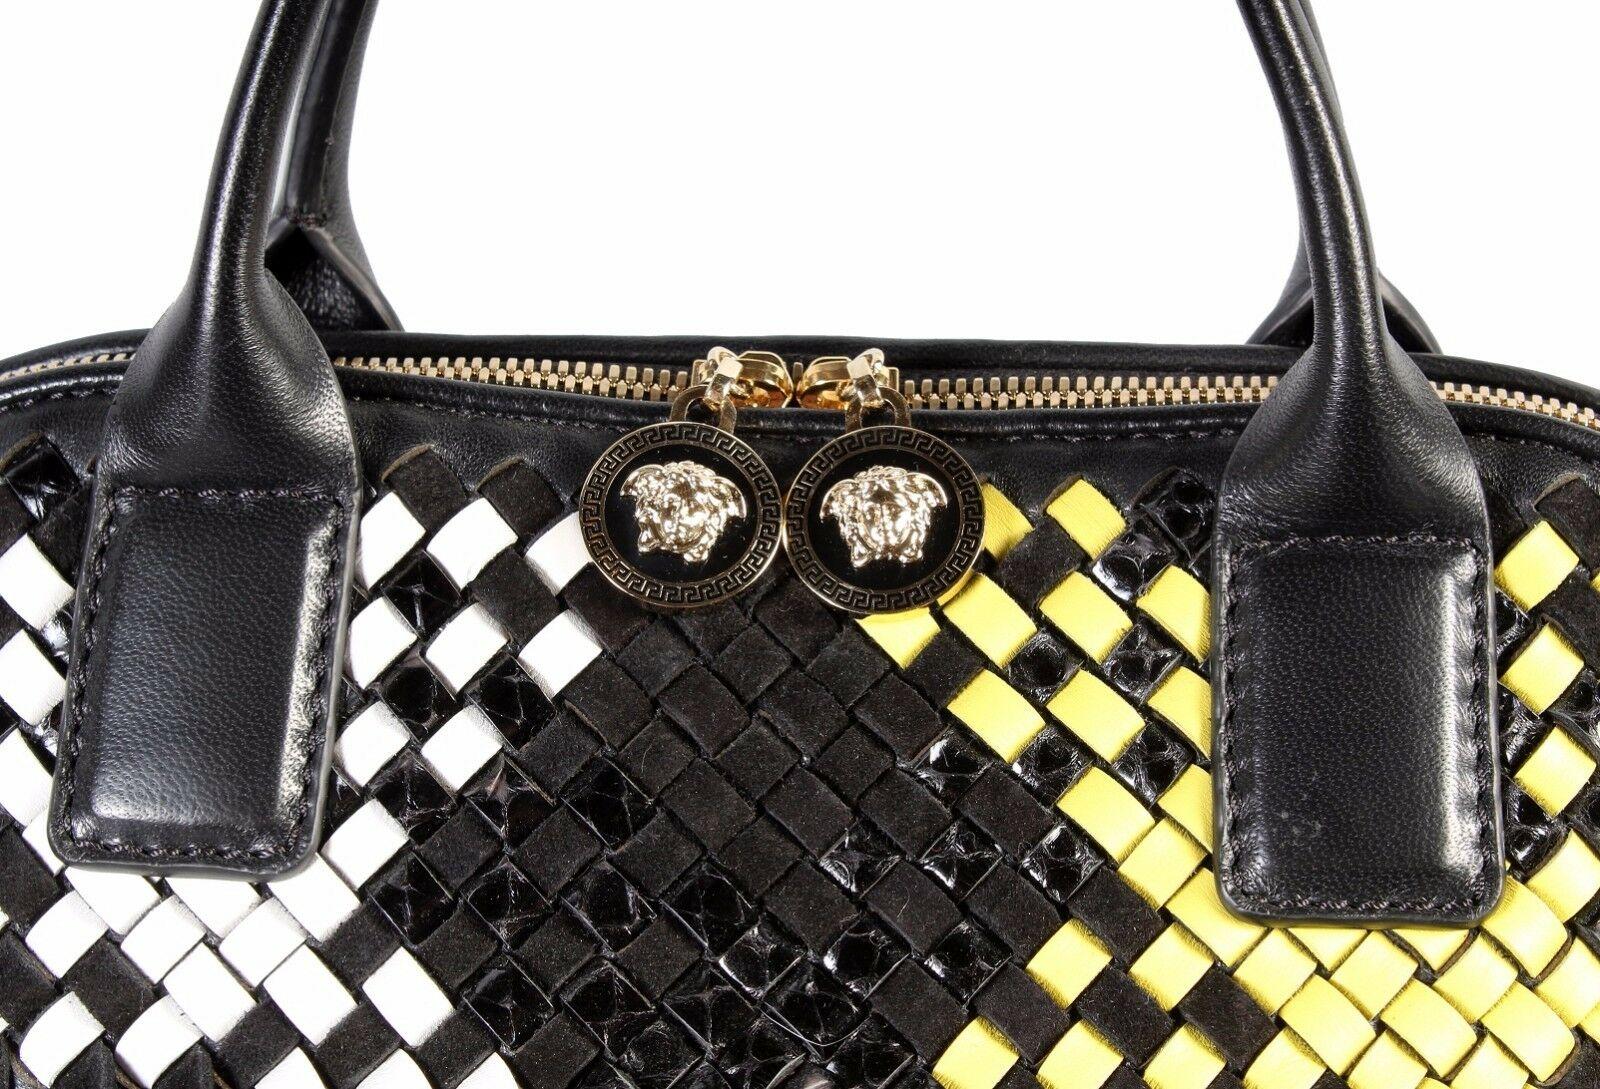 VERSACE LARGE FRINGED VANITAS BLACK, WHITE and YELLOW HANDBAG SHOULDER BAG In New Condition For Sale In Montgomery, TX